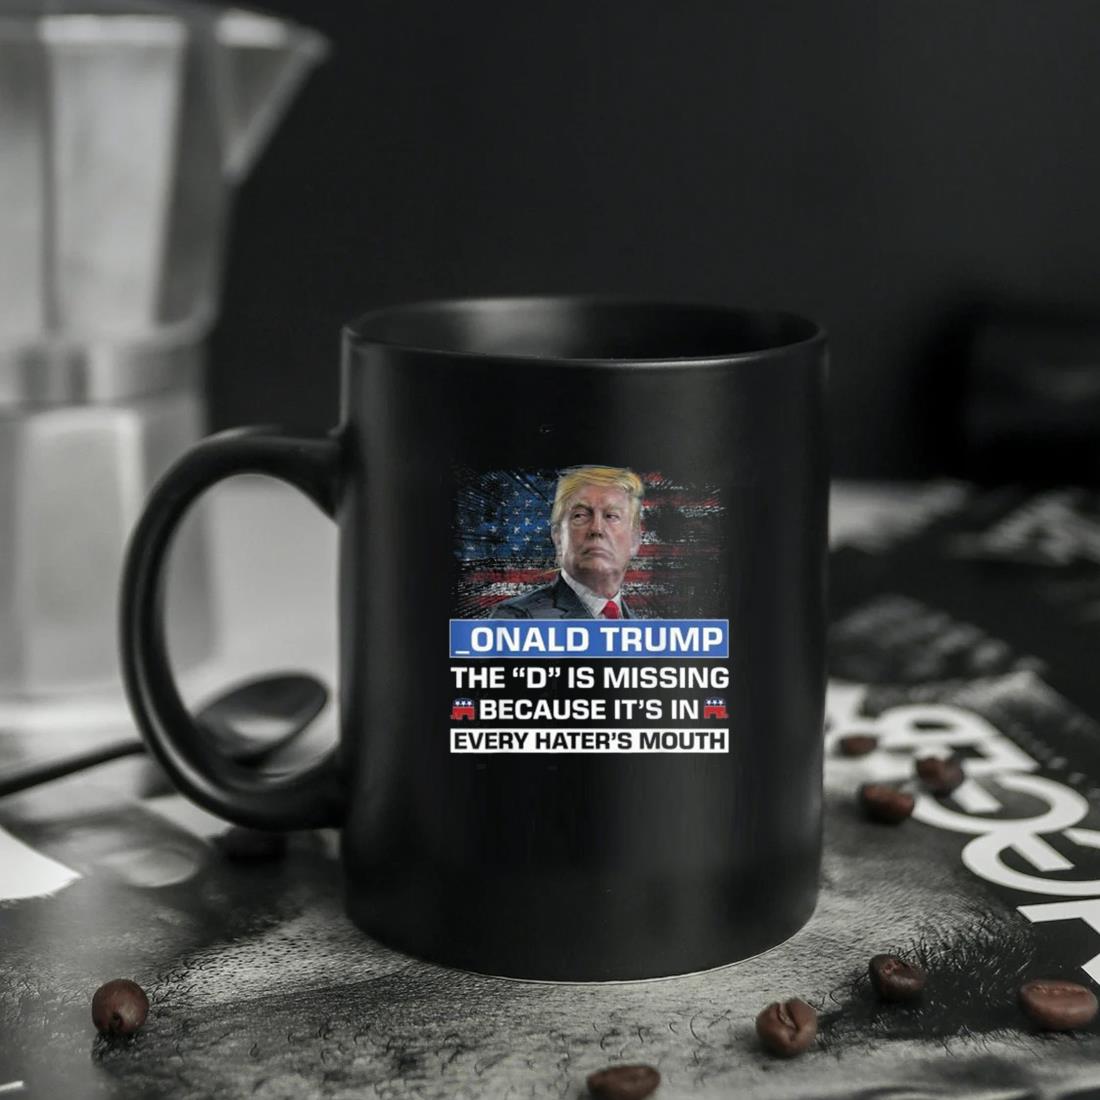 _onald Trump The D Is Missing Because It's In Every Hater's Mouth Mug ten